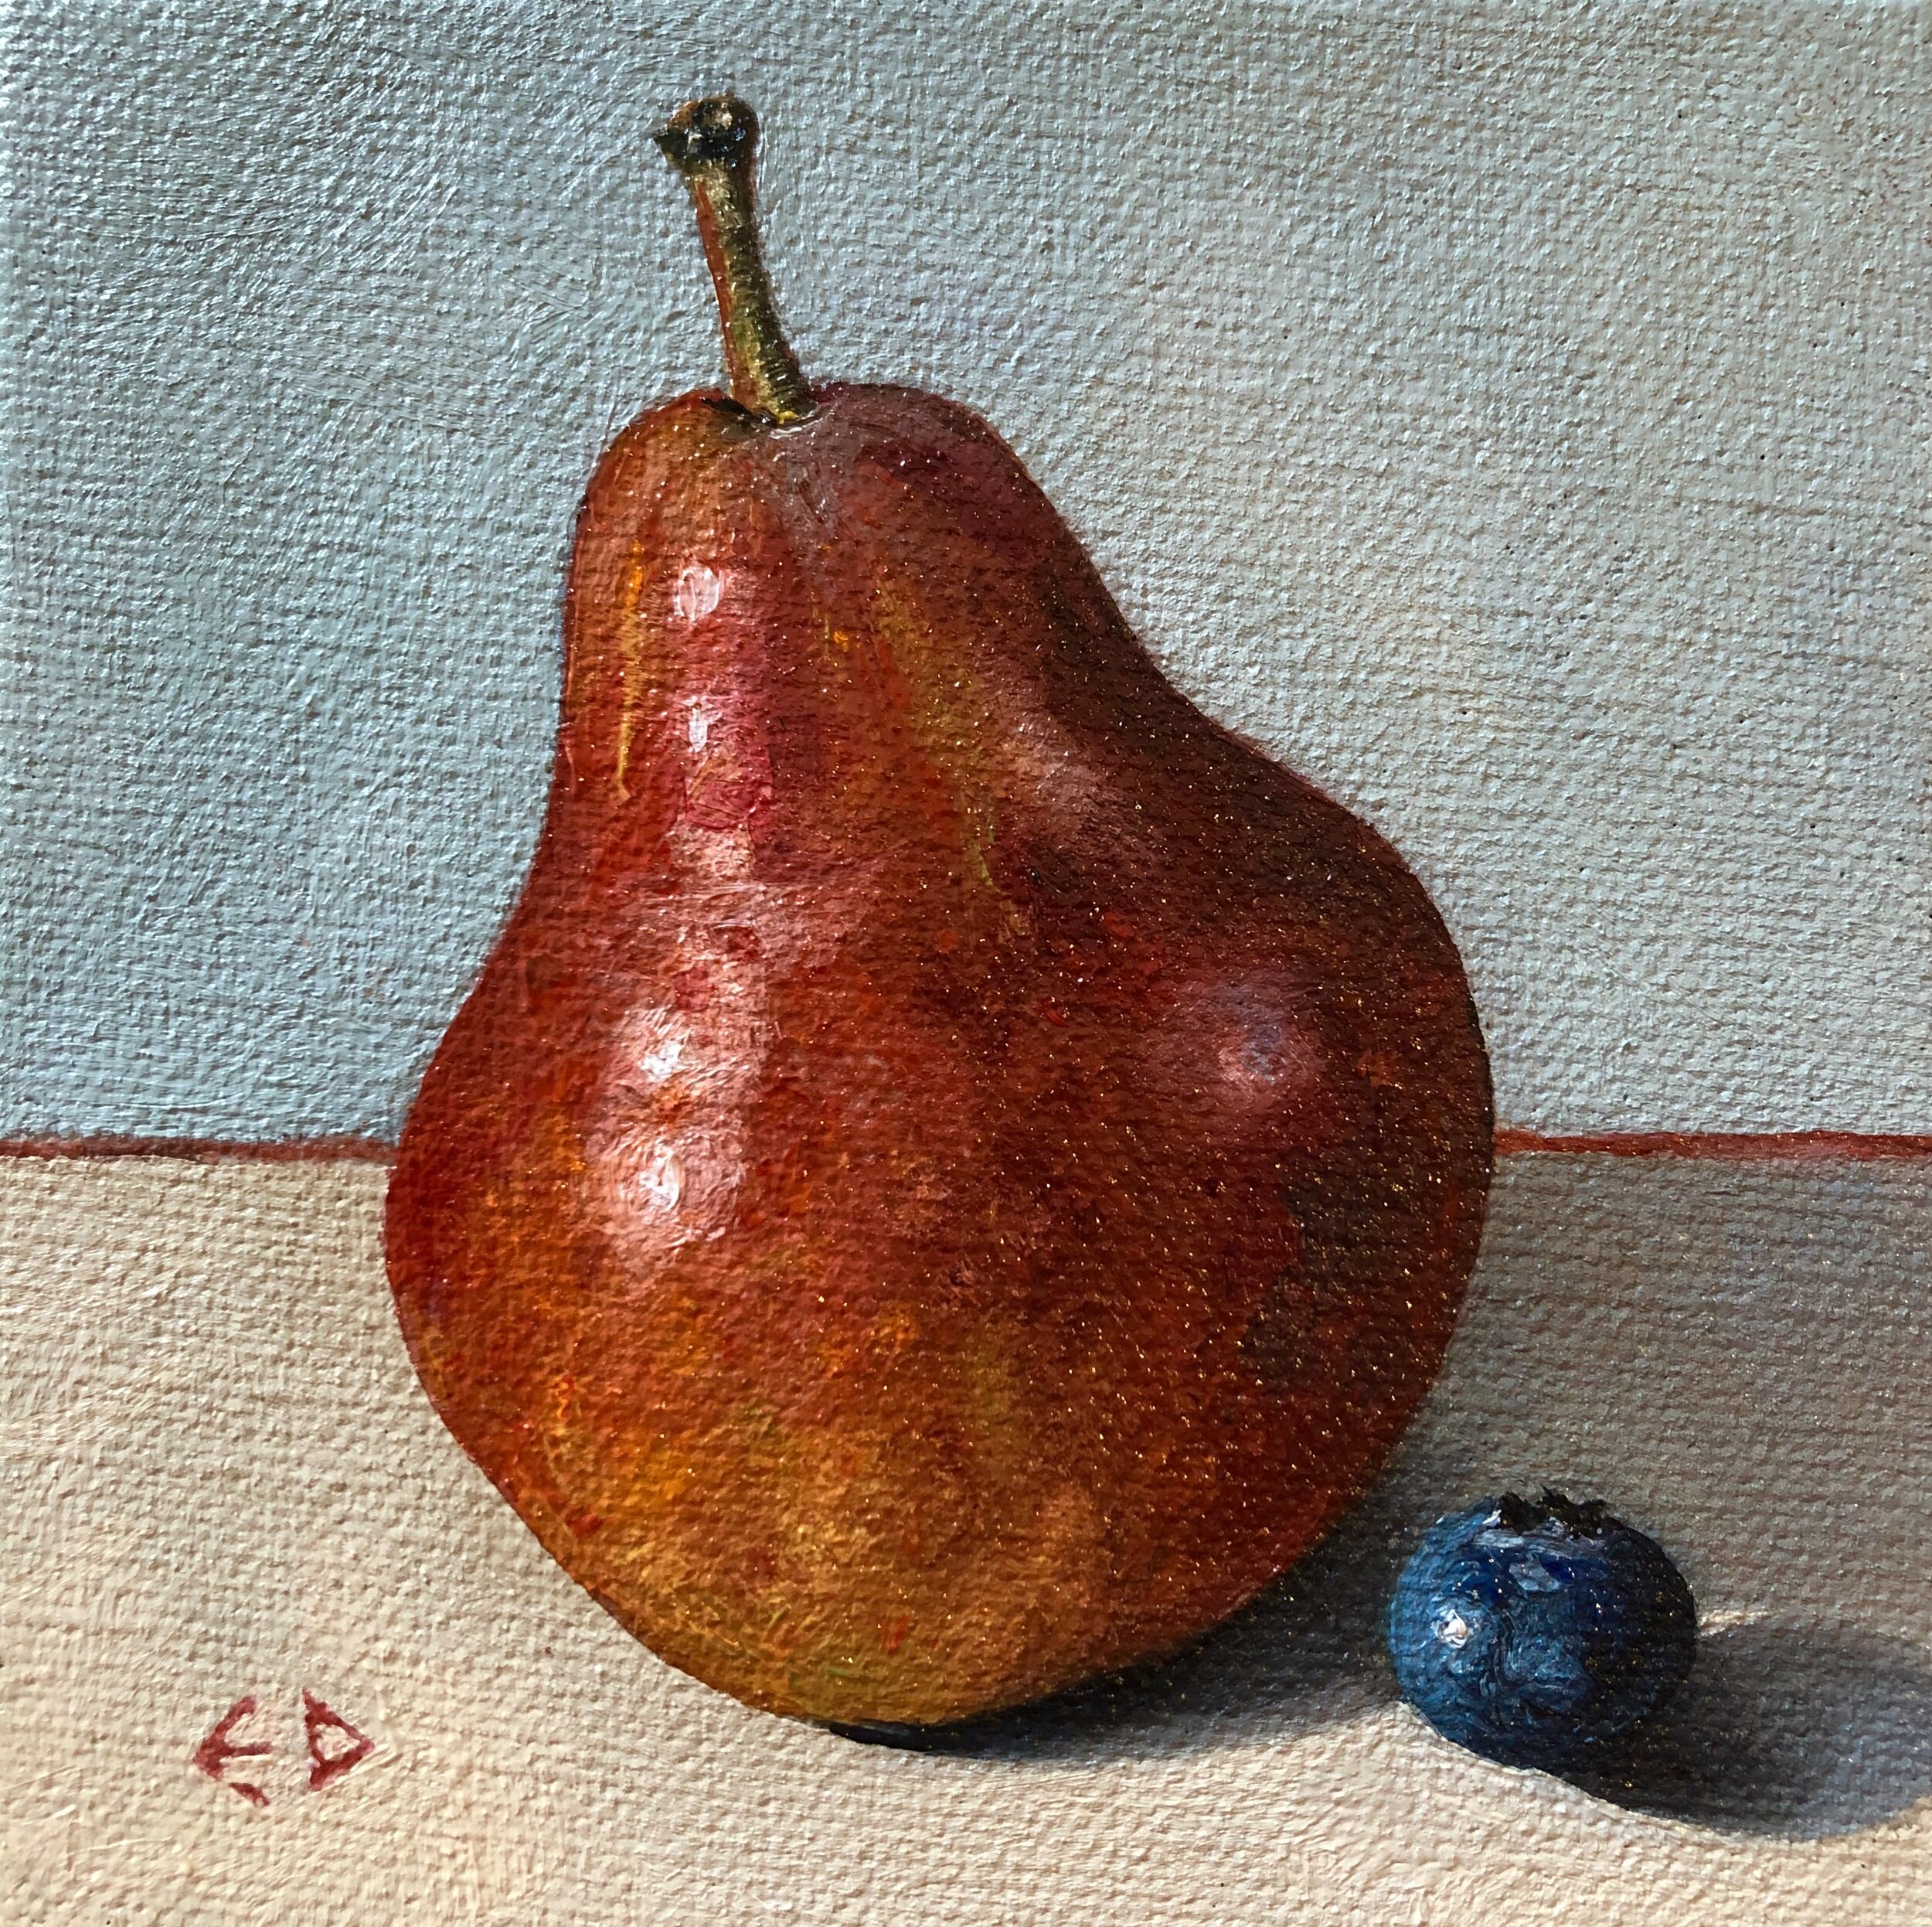 Small red pear with blueberry